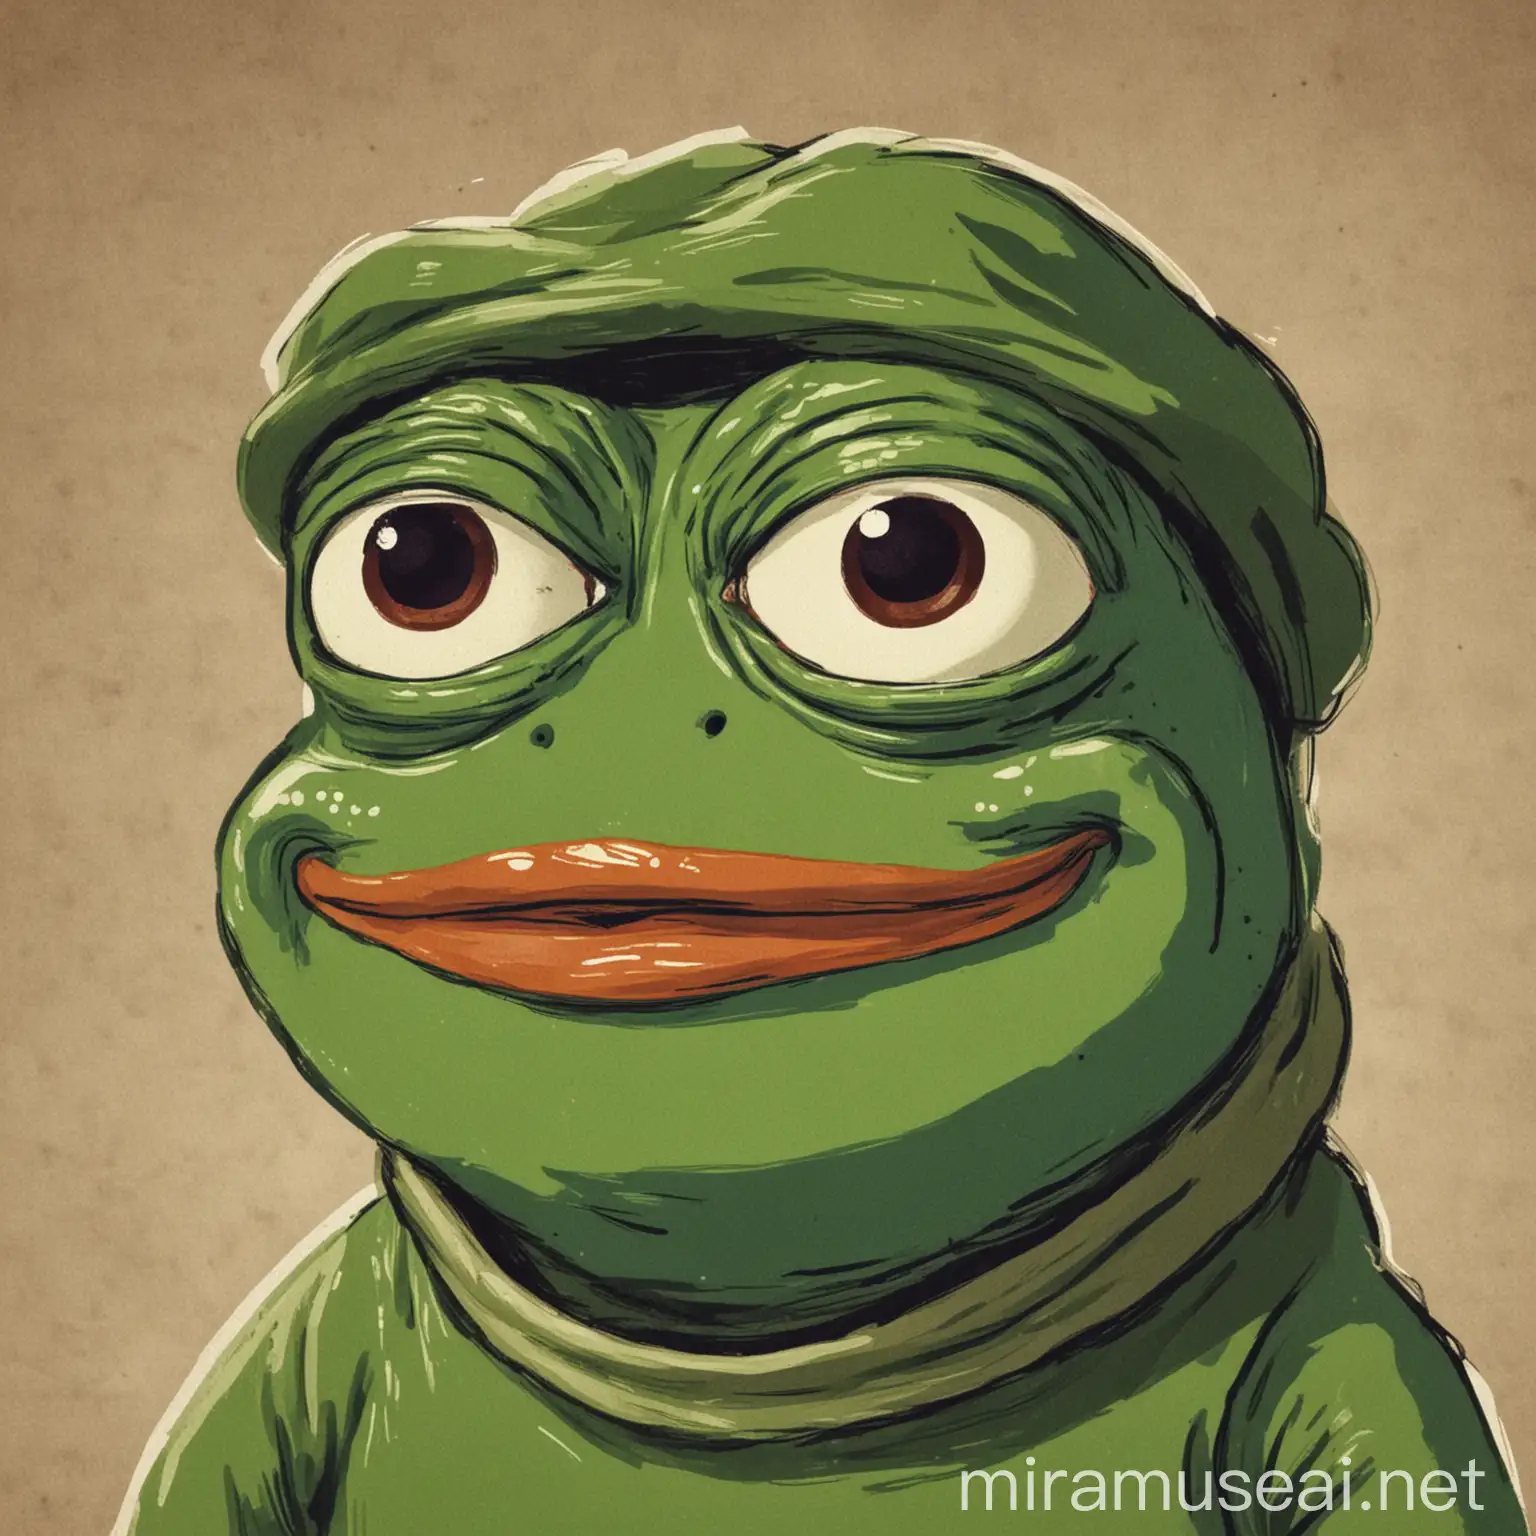 Illustration of Pepe the Frog Character in Vibrant Colors